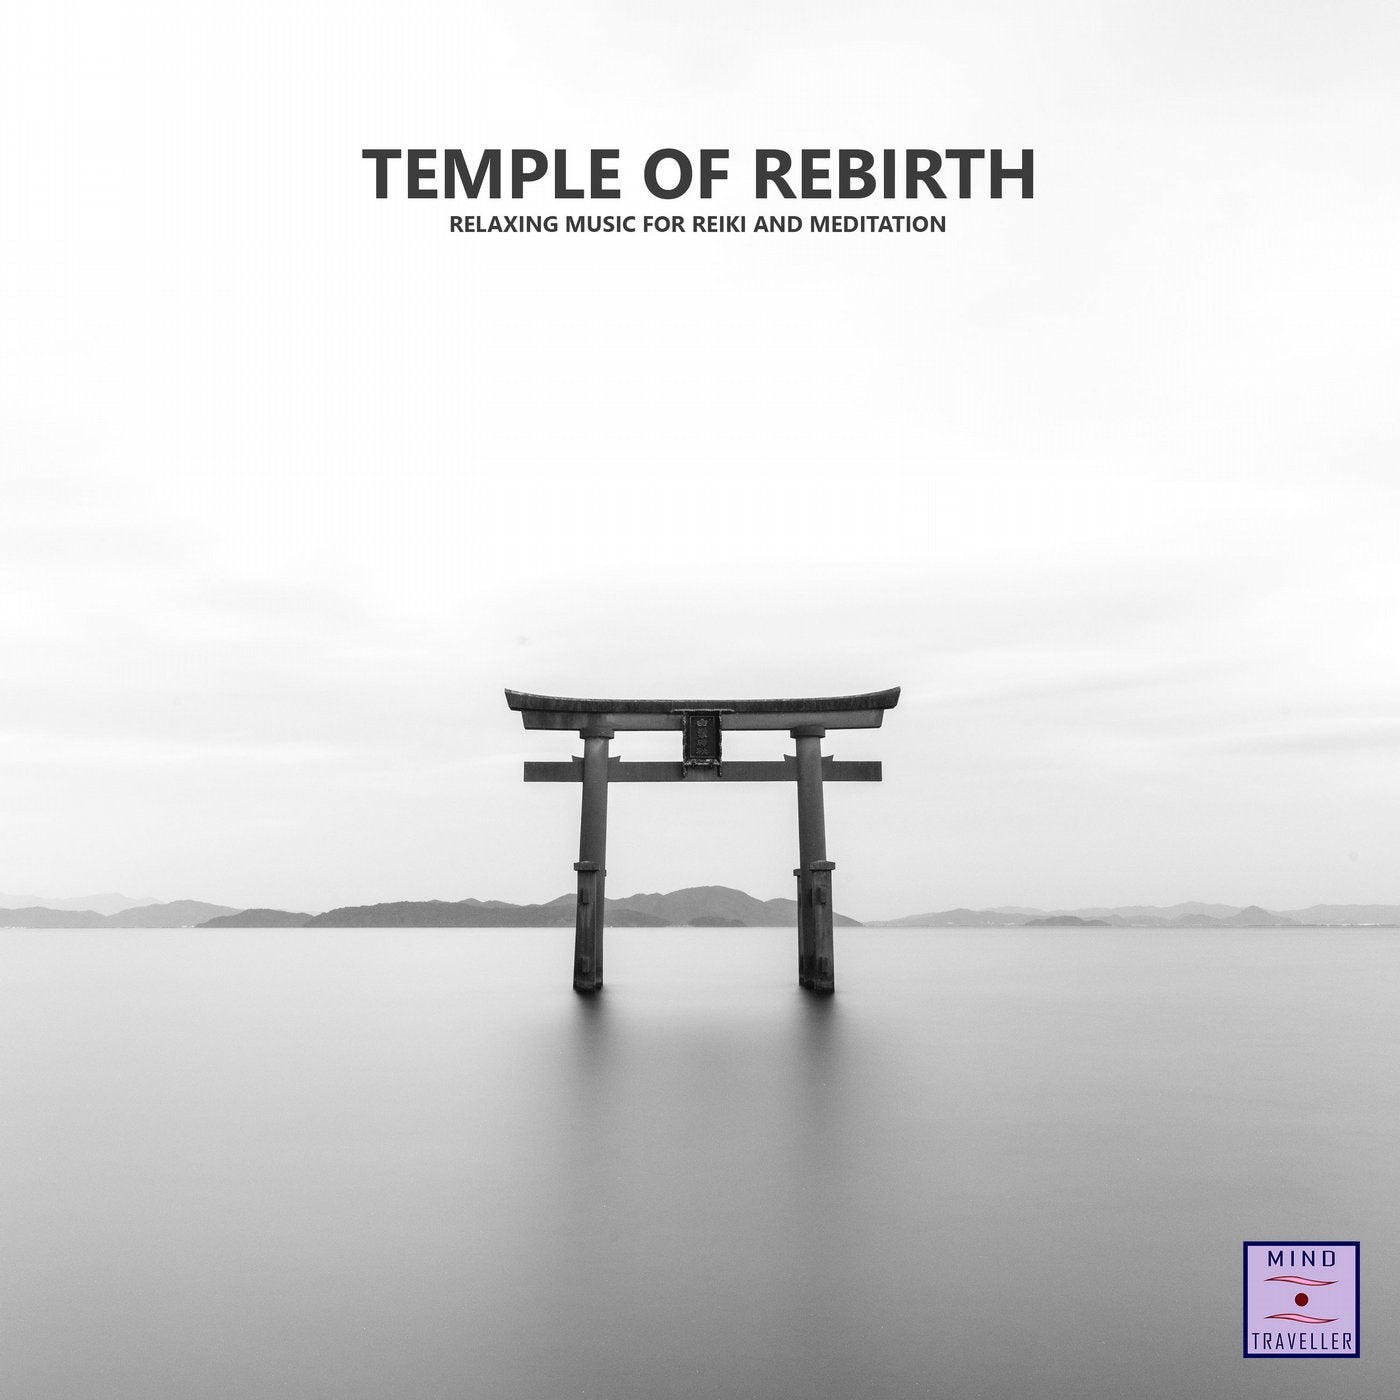 Temple of Rebirth (Relaxing Music for Reiki and Meditation)